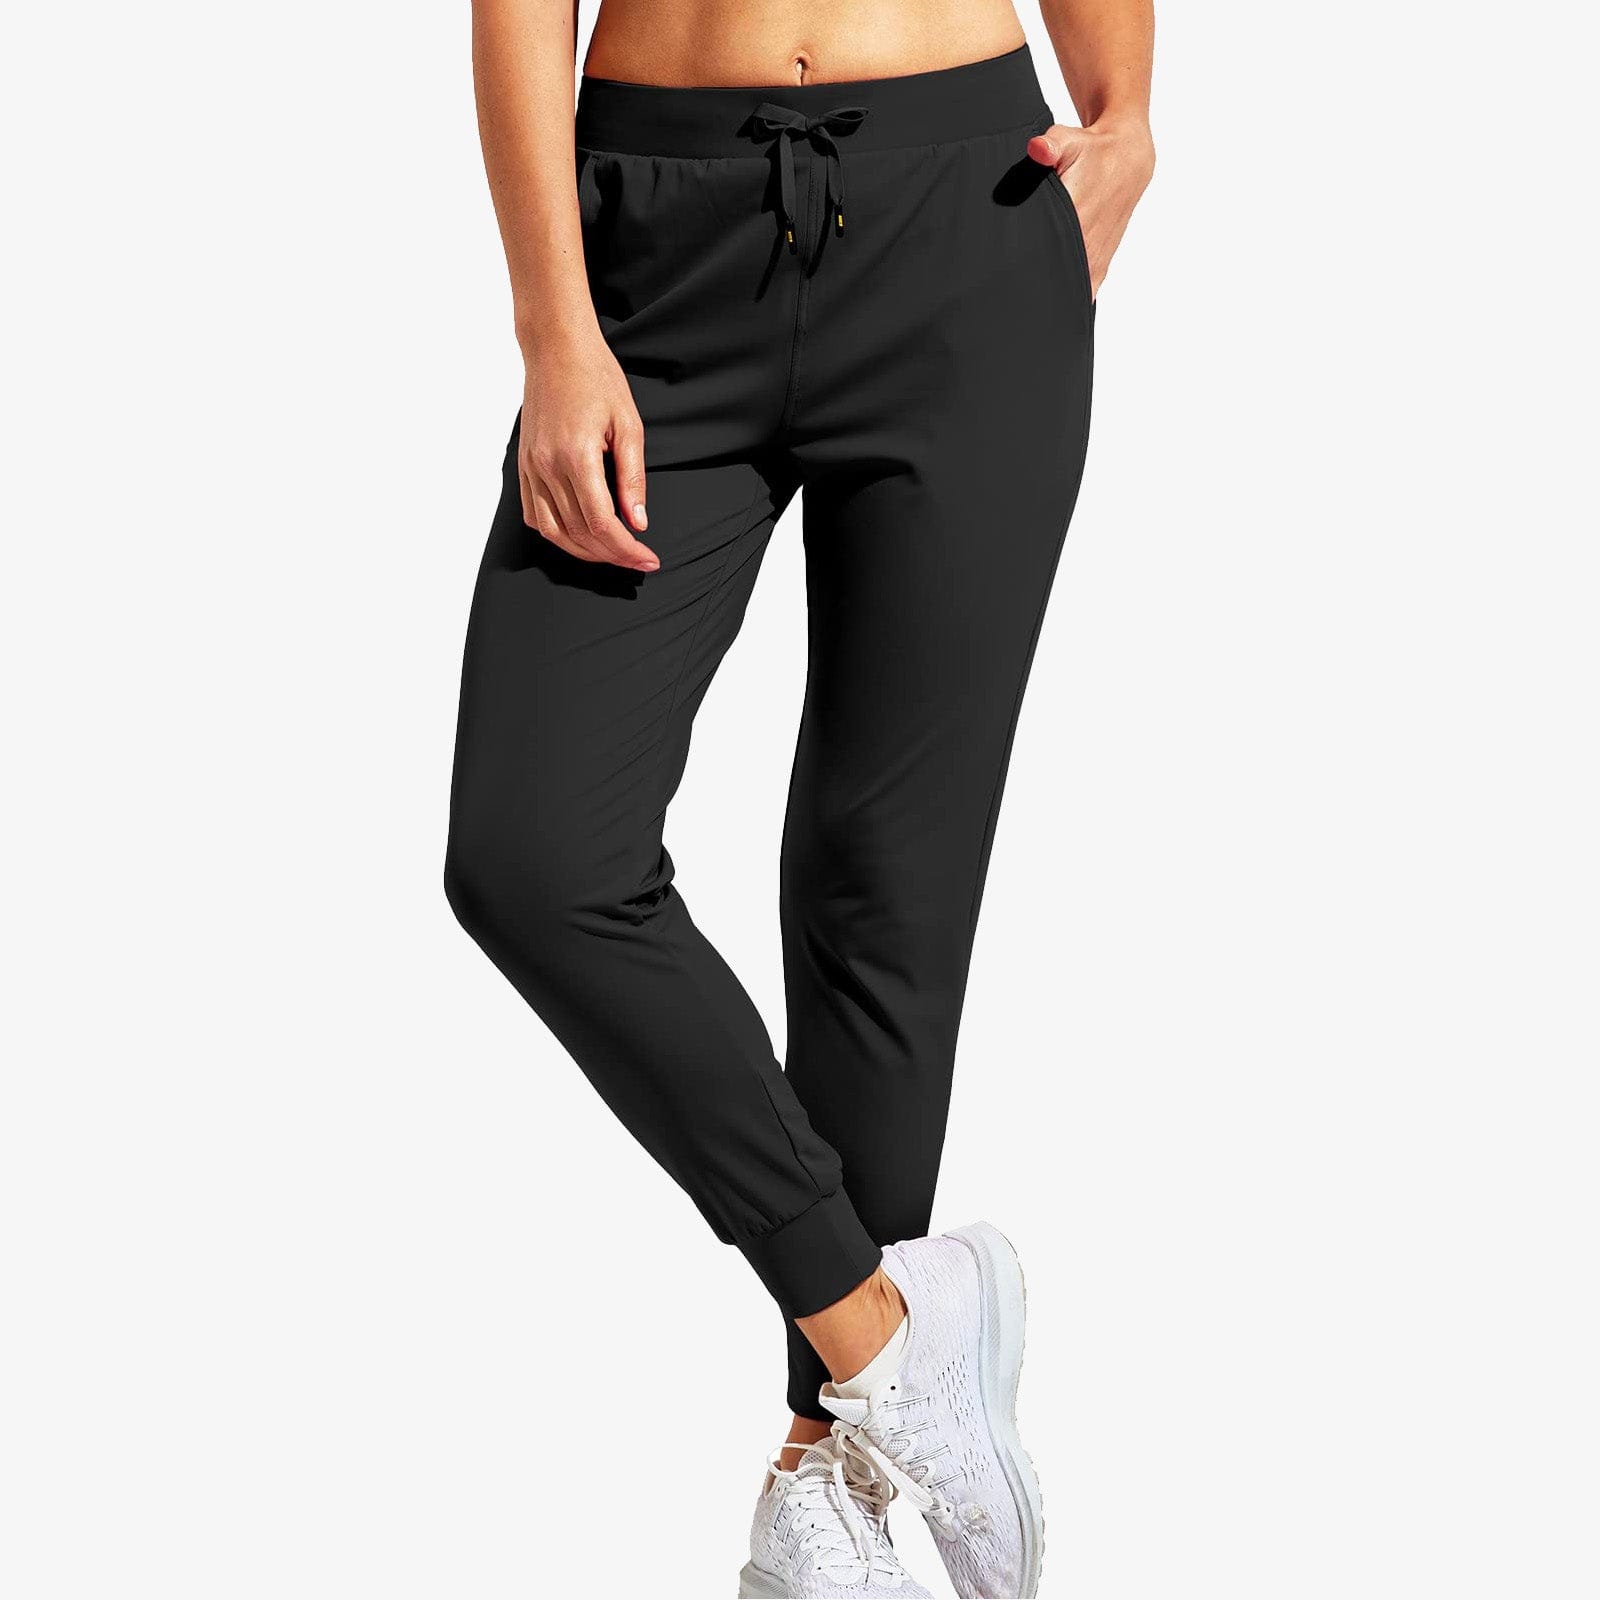 Women's Joggers with Pockets Lightweight Athletic Sweatpants - Black / XS